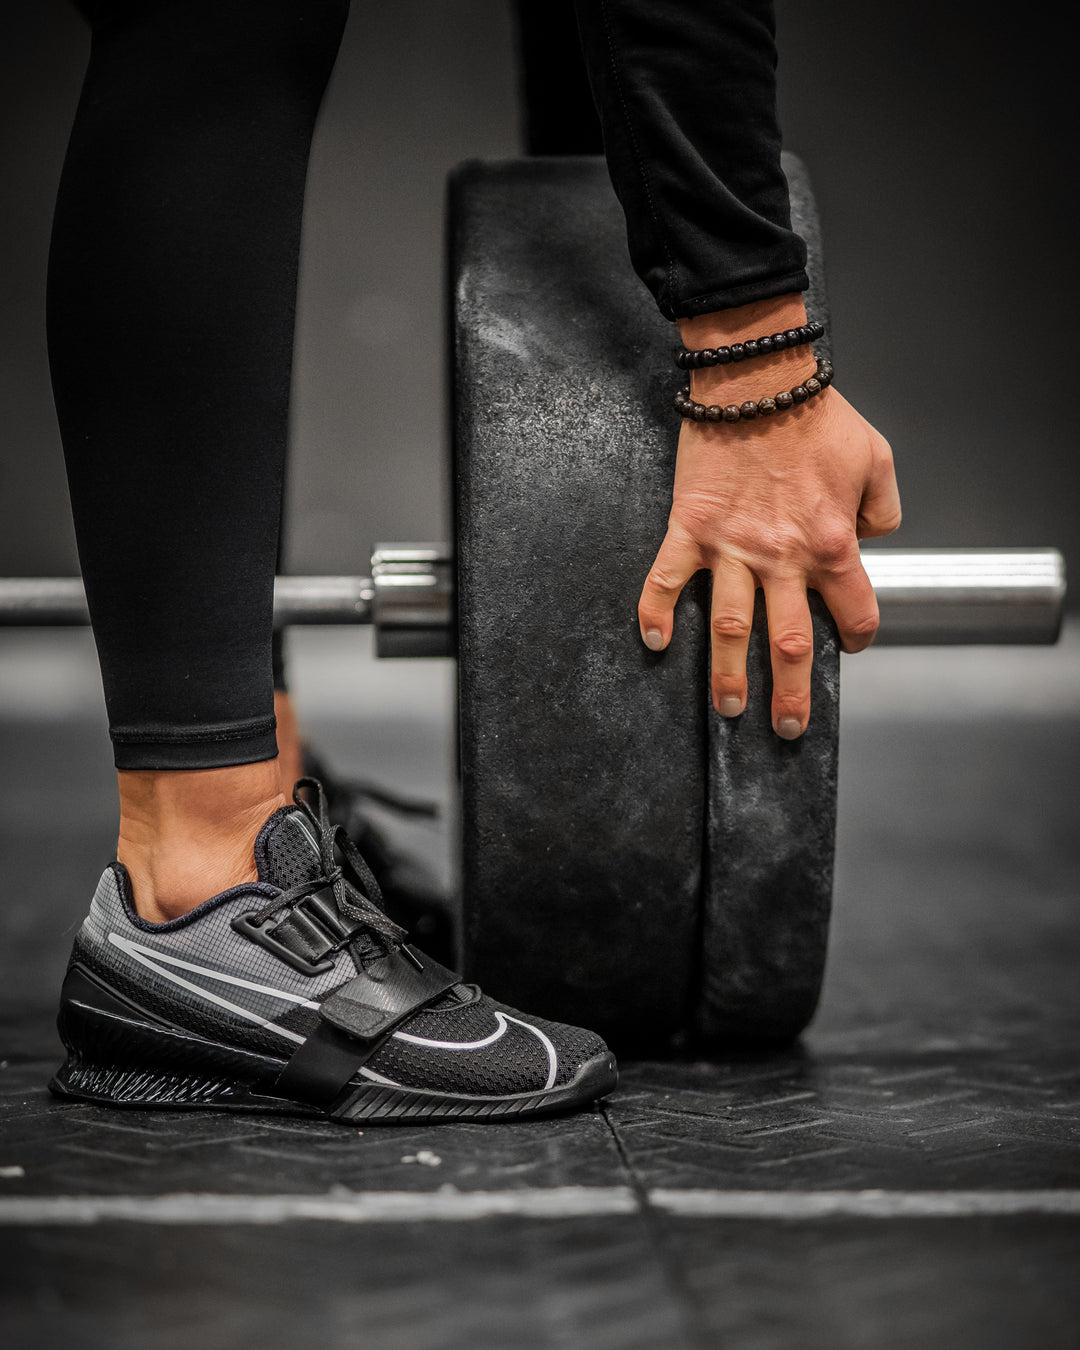 The power of weightlifting shoes - what are the real benefits?